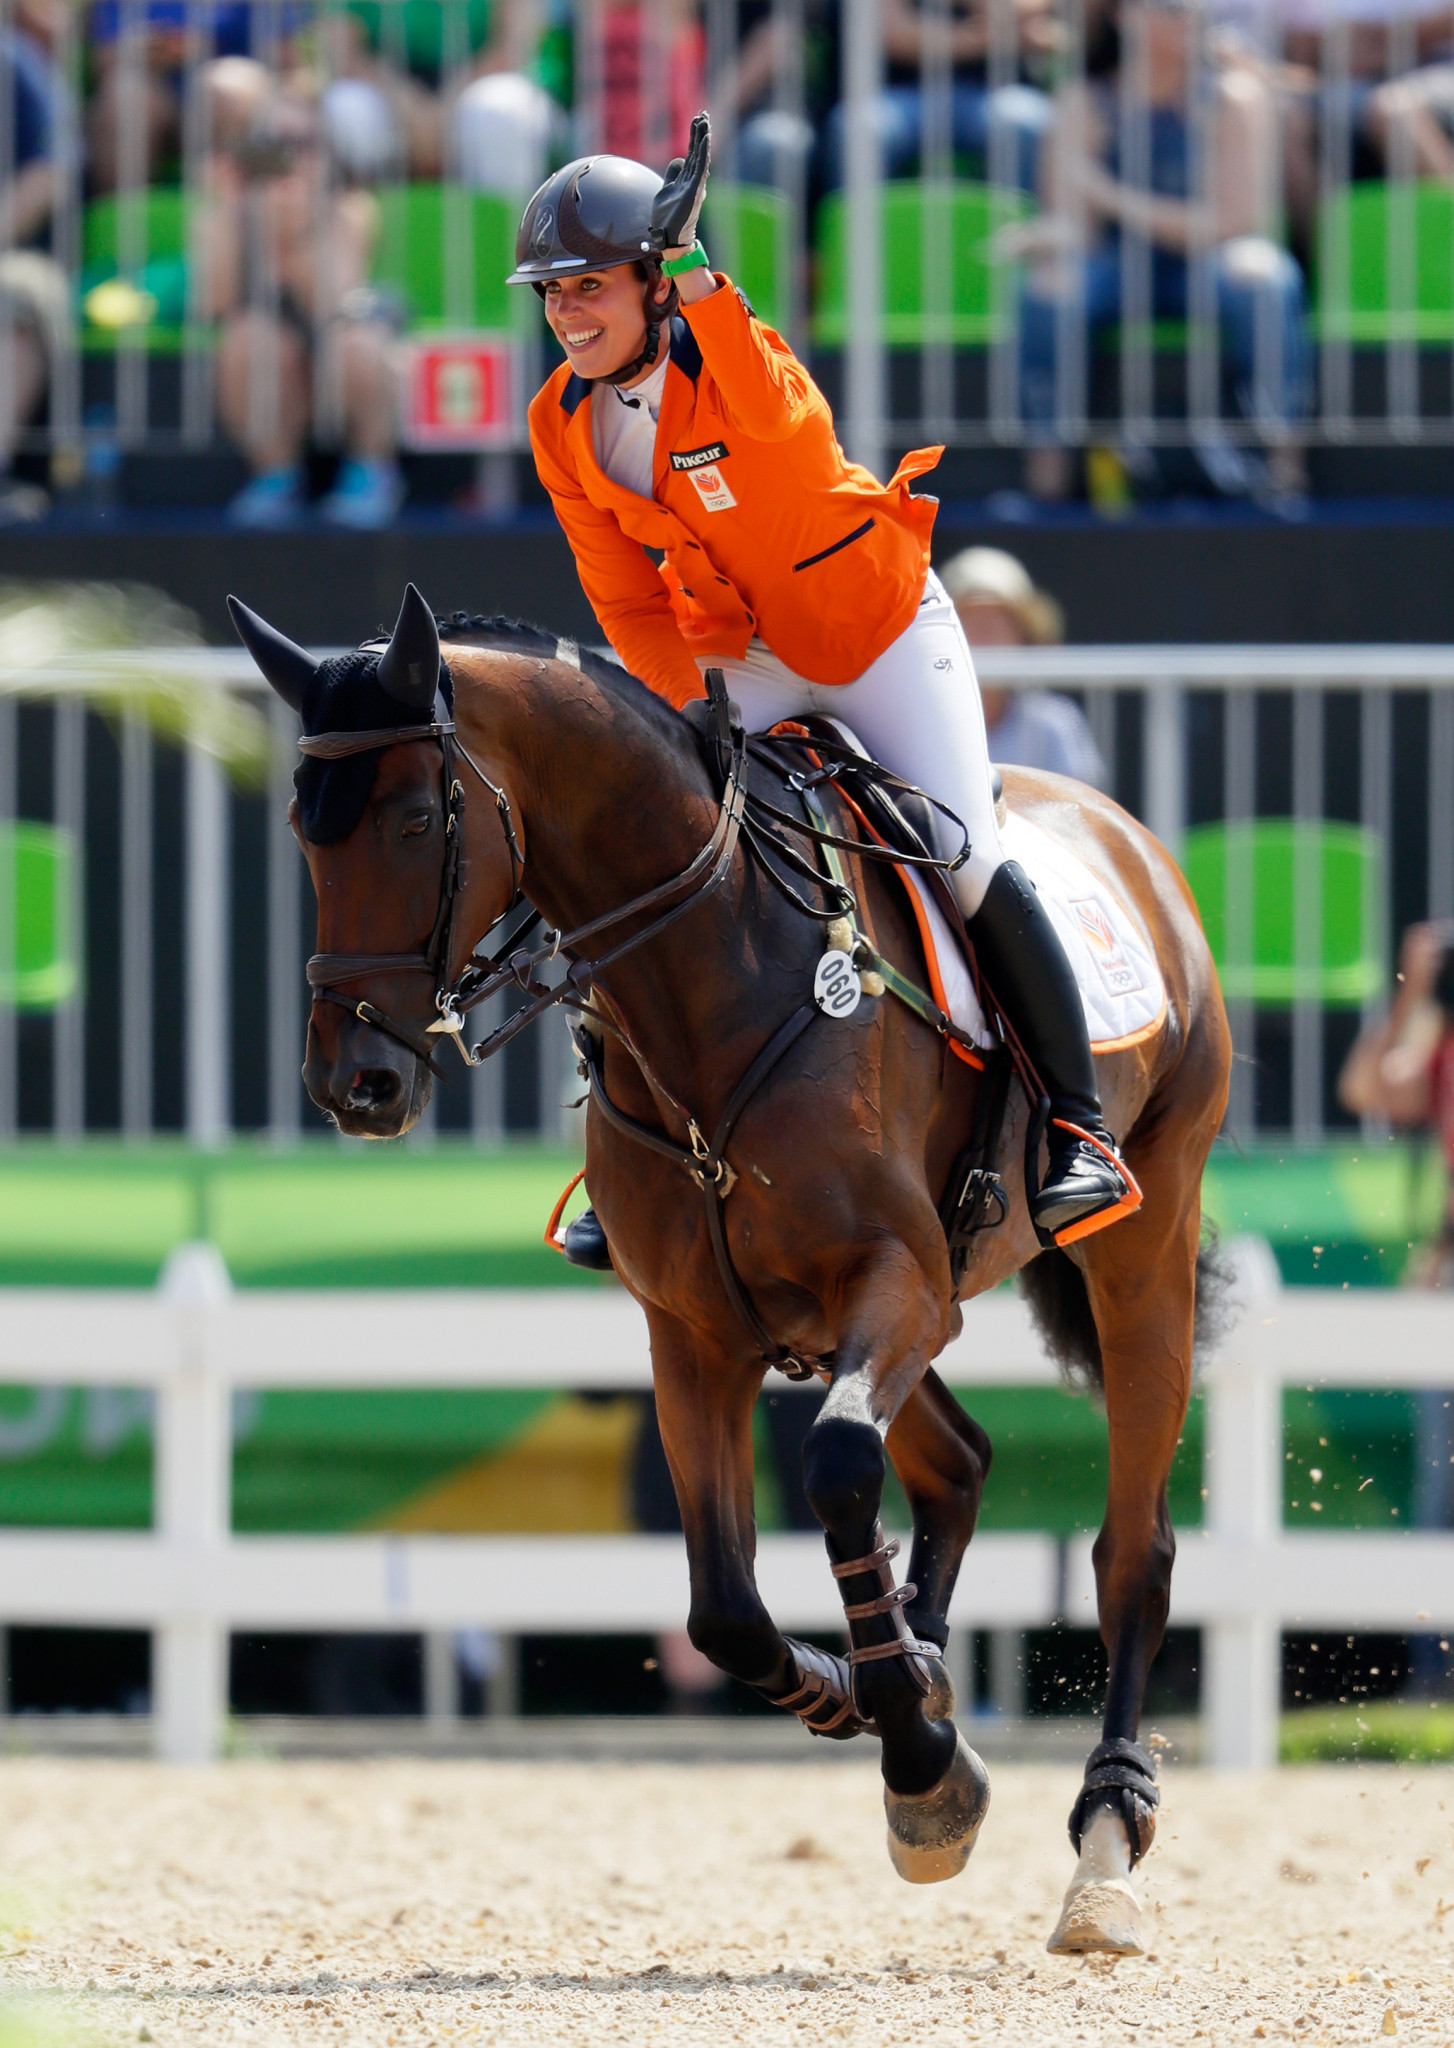 Blom retains lead at FEI Nations Cup Eventing in Waregem 